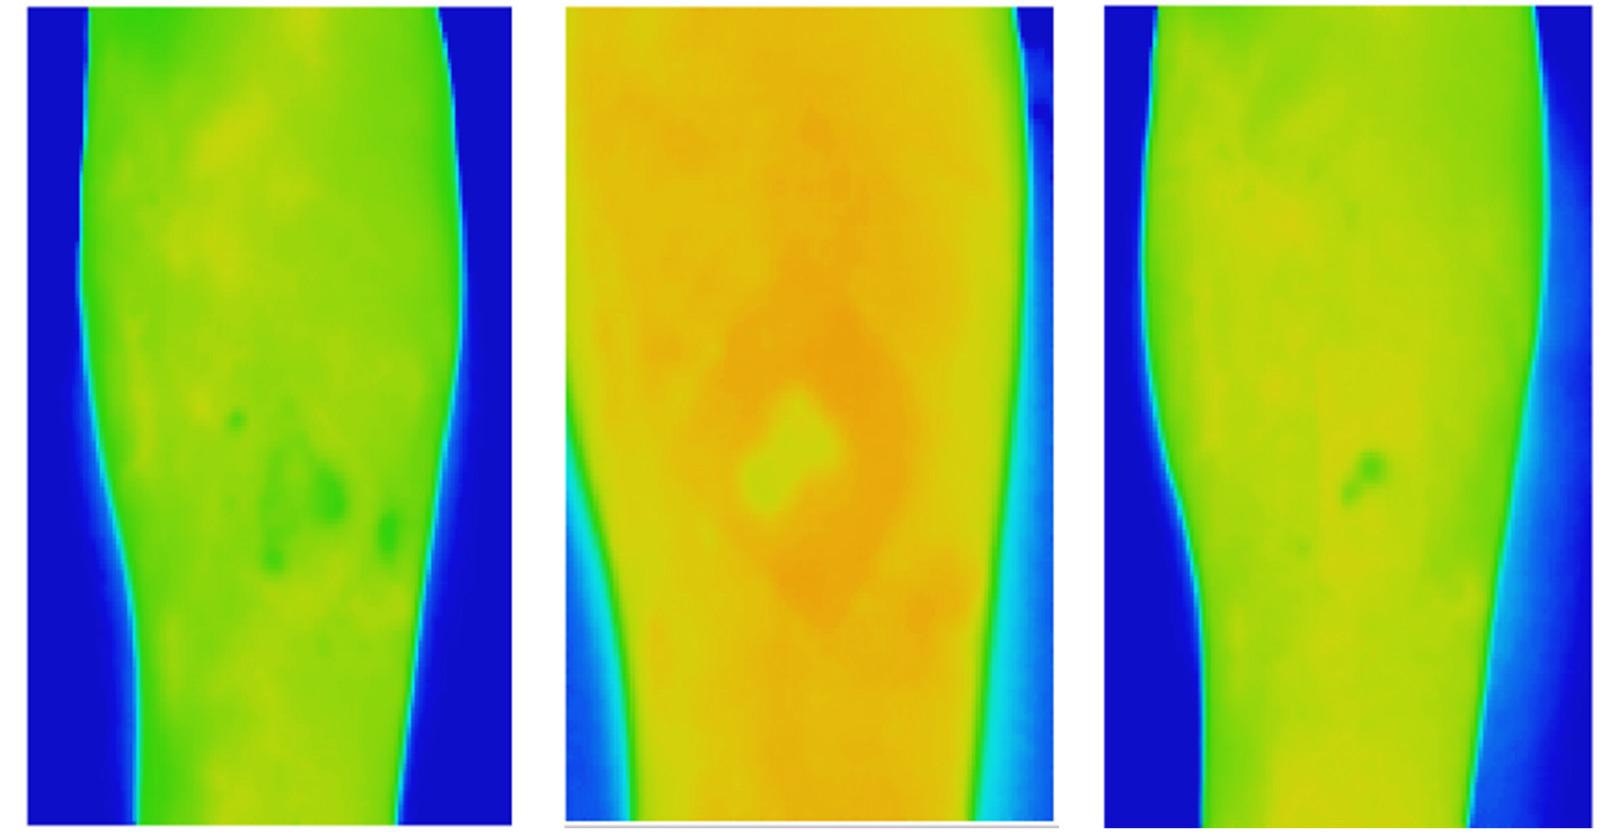 New Thermal Imaging Technique can Improve Chronic Wound Care